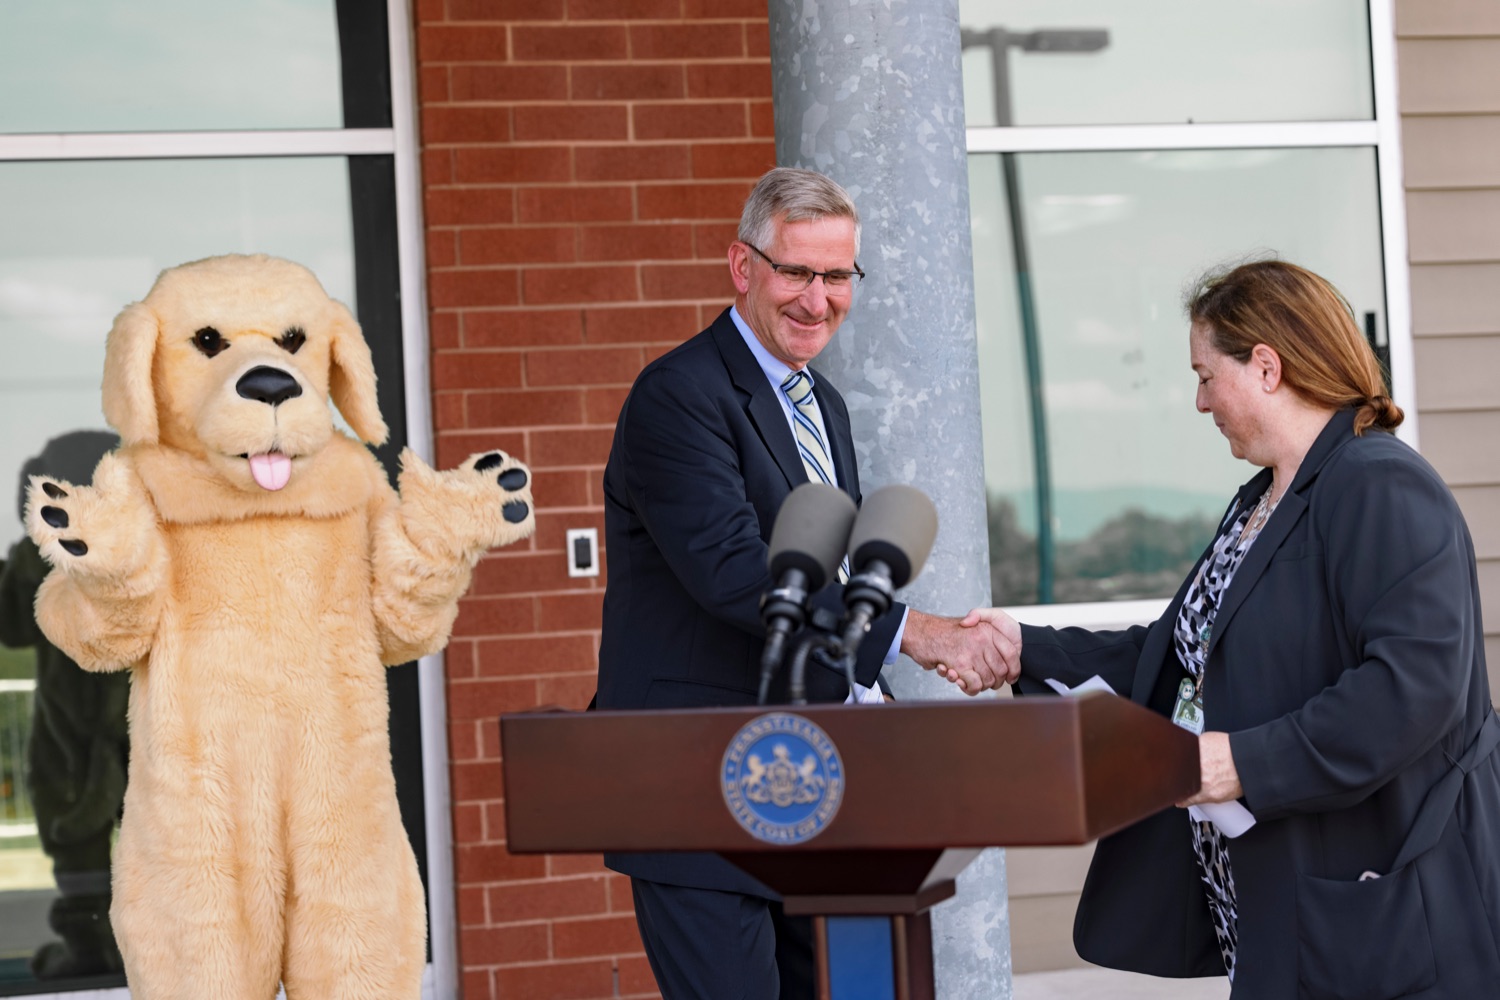 Dr. Andria Saia, executive director of Capital Area Intermediate, shakes hands with PA Dept. of Agriculture Secretary Russell Redding during a press conference, which highlighted the success of Pennsylvania's farm to school programs, at Hill Top Academy in Mechanicsburg on Friday, August 27, 2021.<br><a href="https://filesource.amperwave.net/commonwealthofpa/photo/19054_AGRIC_FarmToSchool_NK_008.jpg" target="_blank">⇣ Download Photo</a>